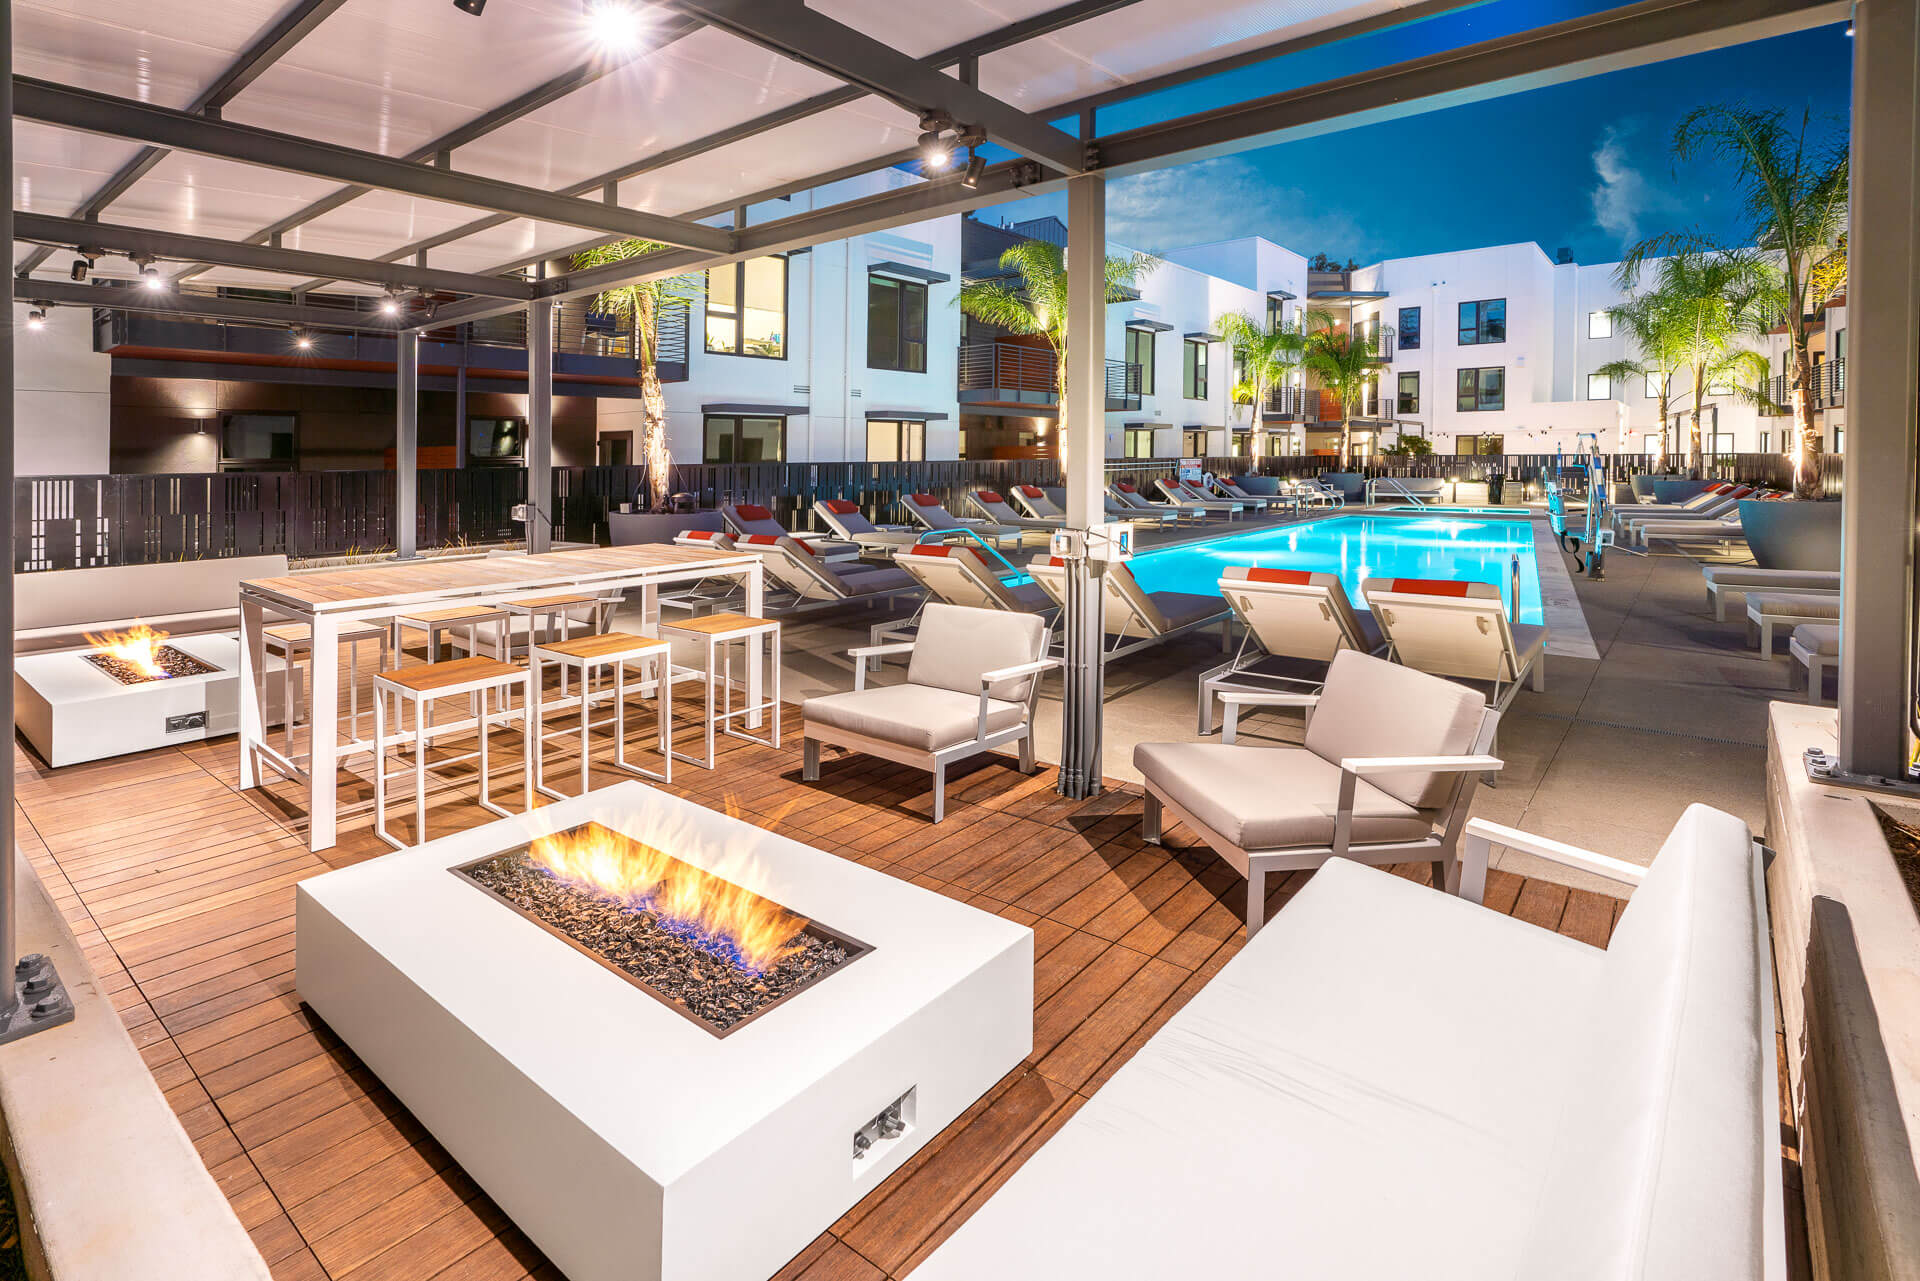 Outdoor pool area featuring dining areas and fire pits for a complete leisure experience